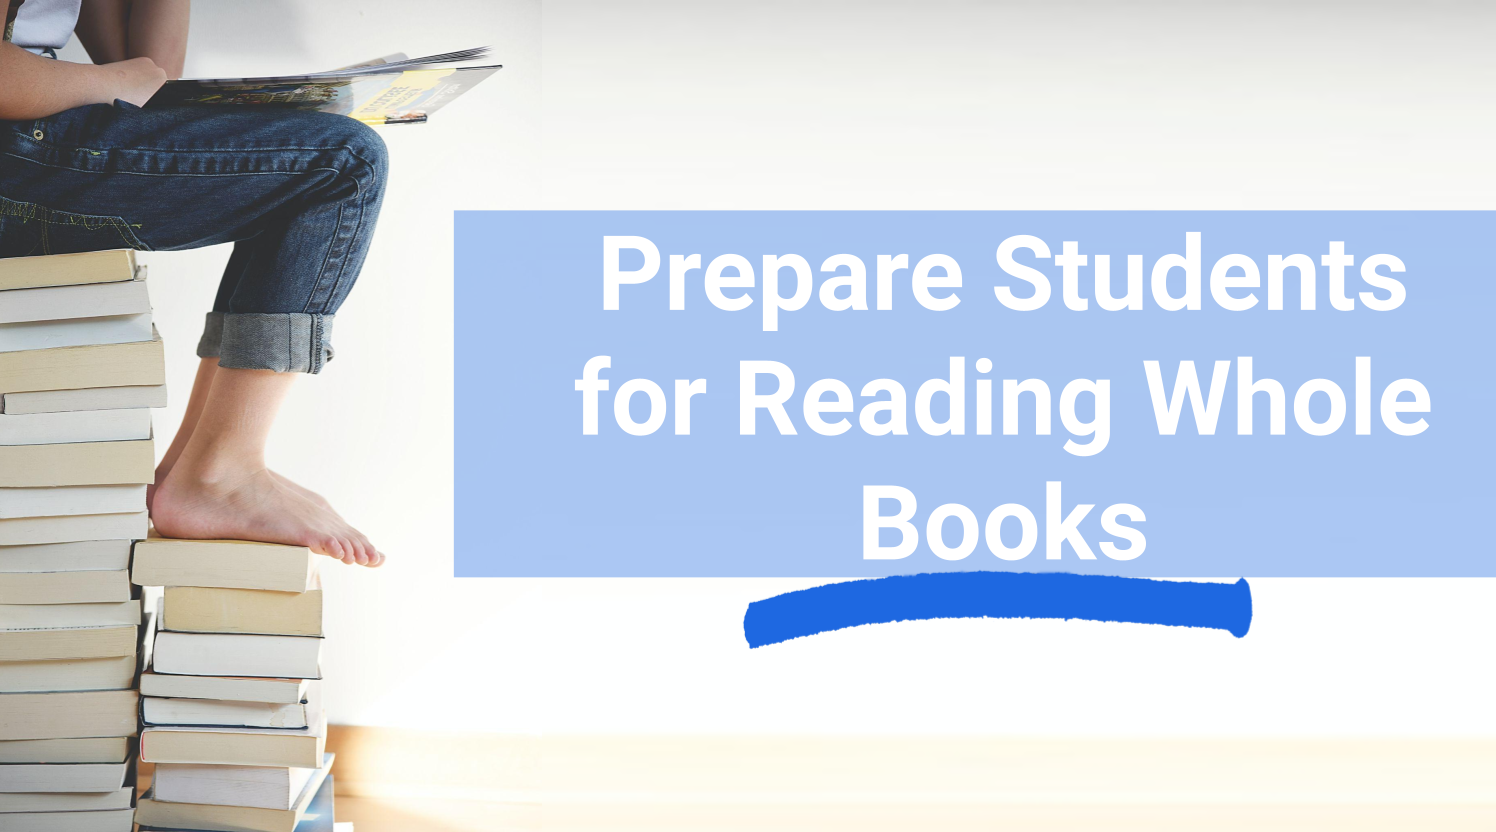 4 Easy Ways to Prepare Students for Reading Whole Books